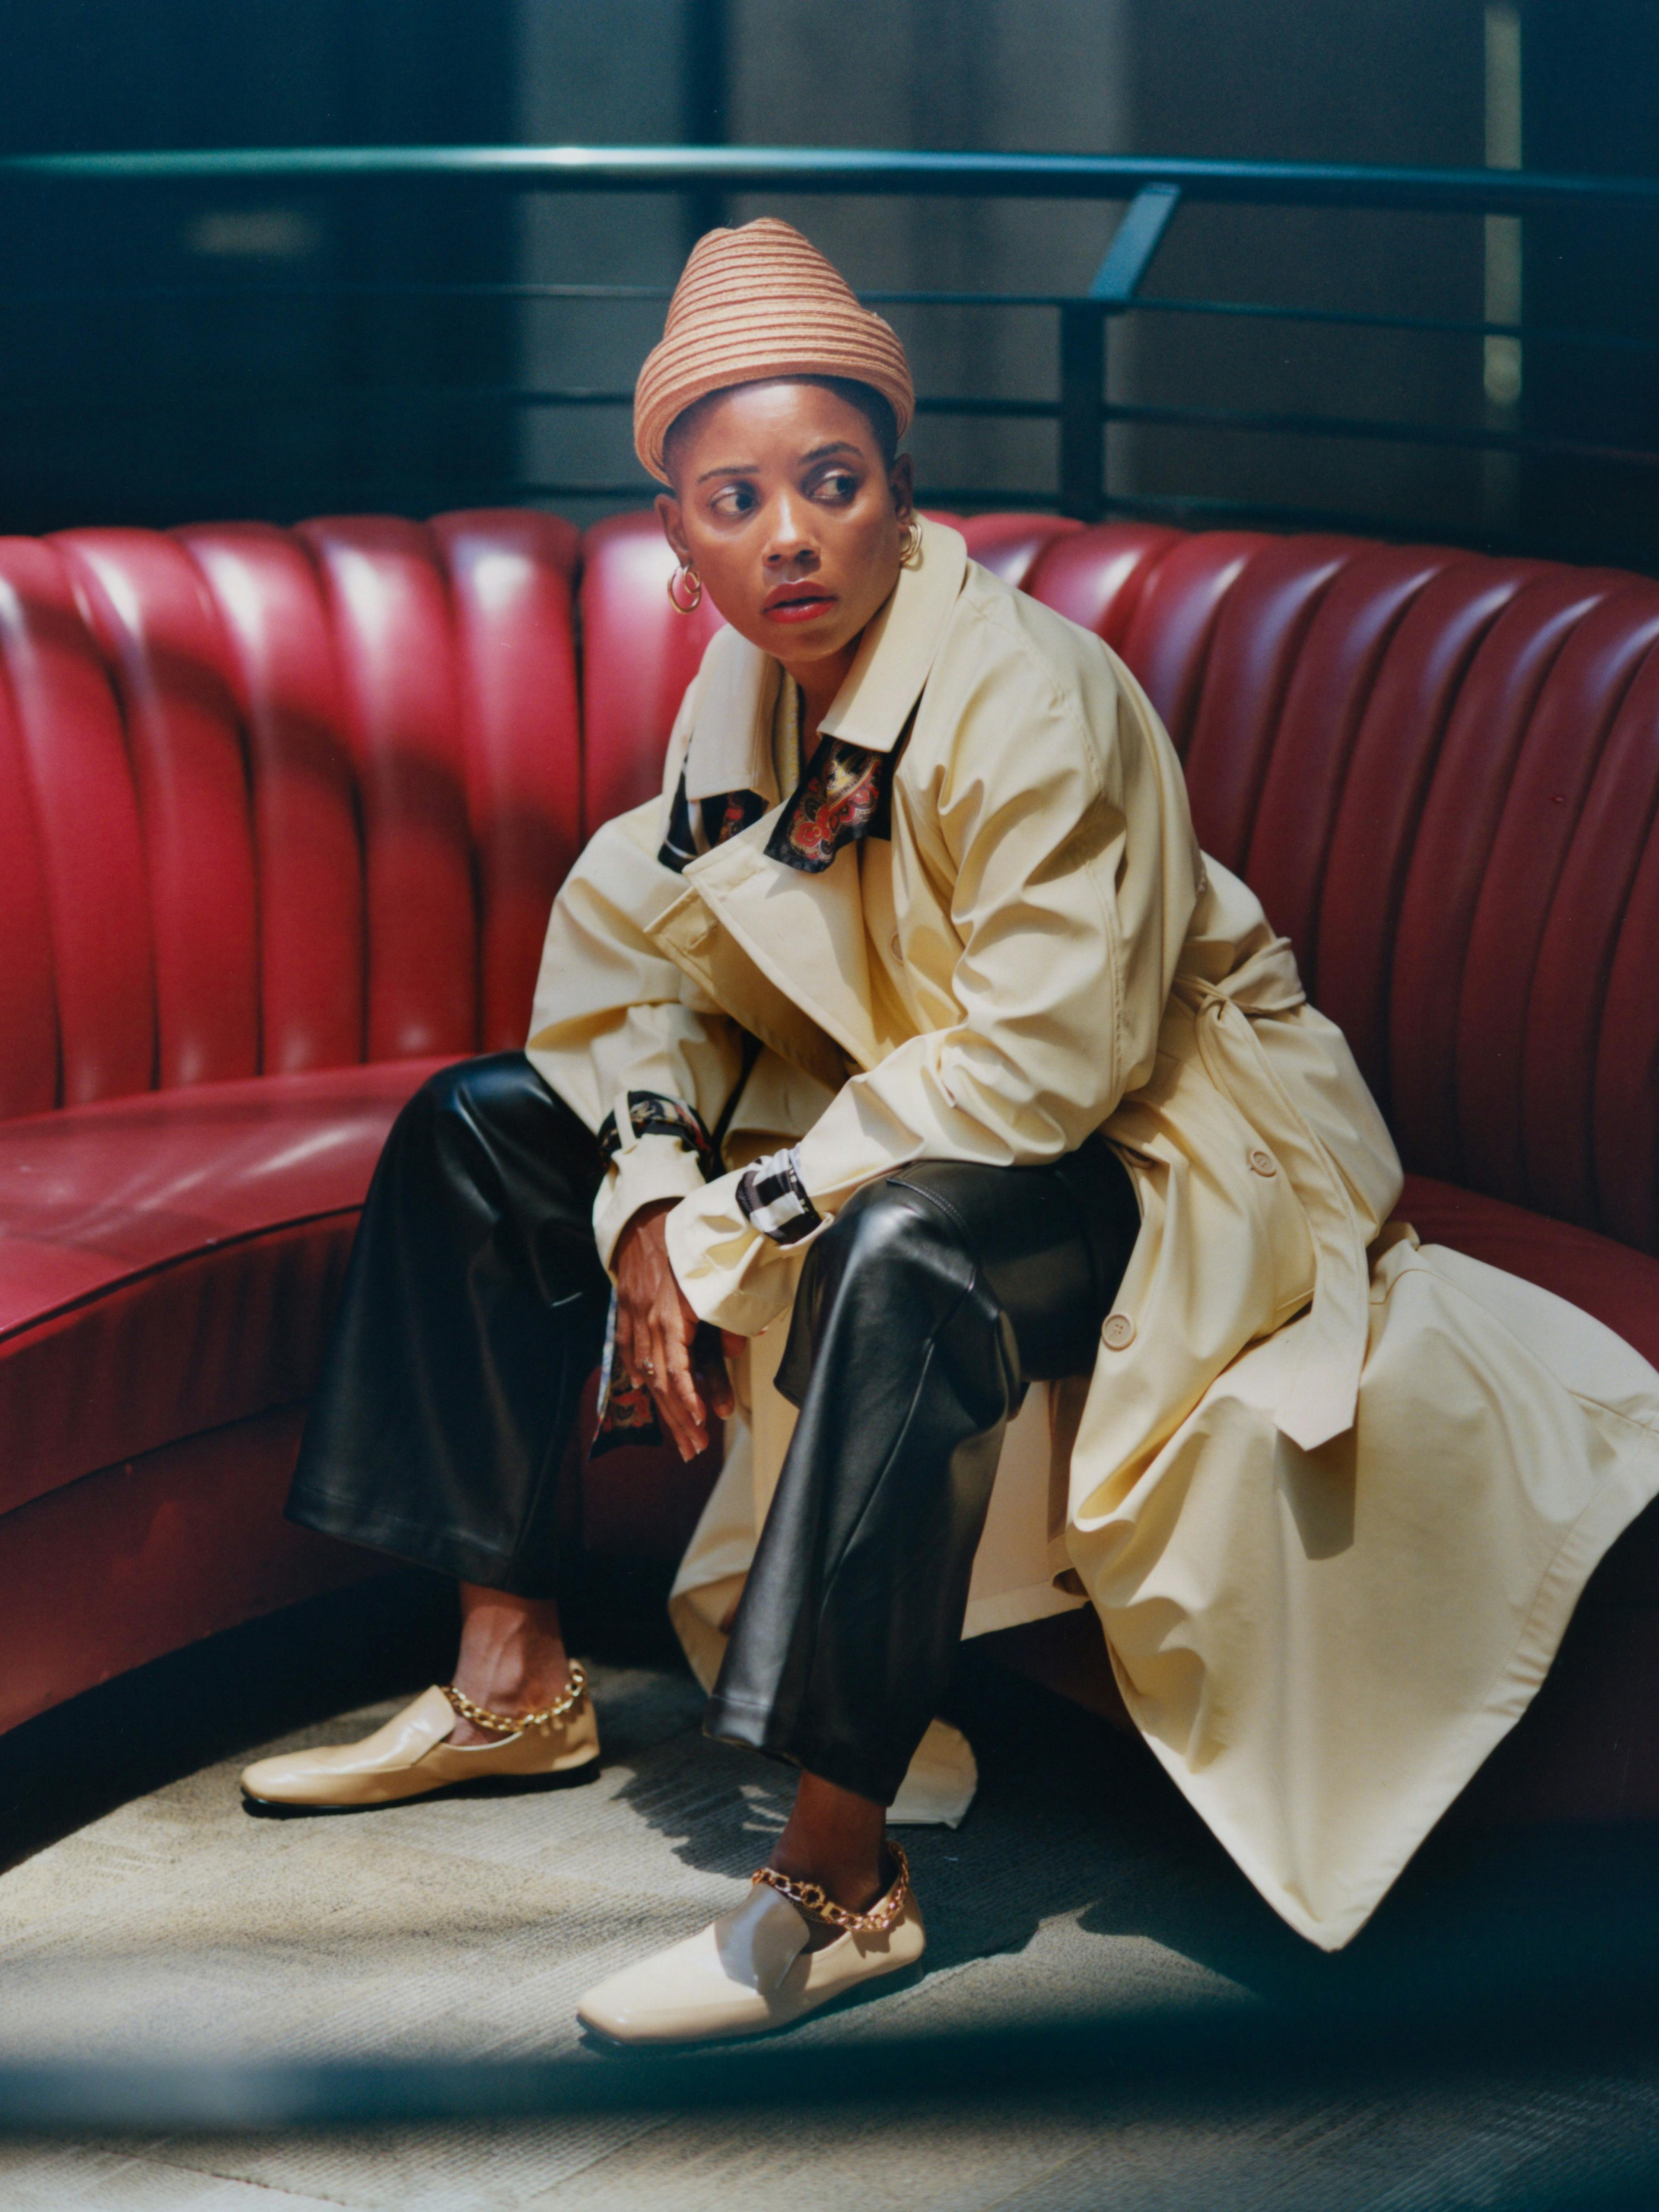 Trenchcoat by Ottolinger. Vest by The Elder Statesman. Pants by Nomia. Hat by ESENSHEL. Shoes by BY FAR. Earrings, Bravo's own. Ring by E.M. Kelly.